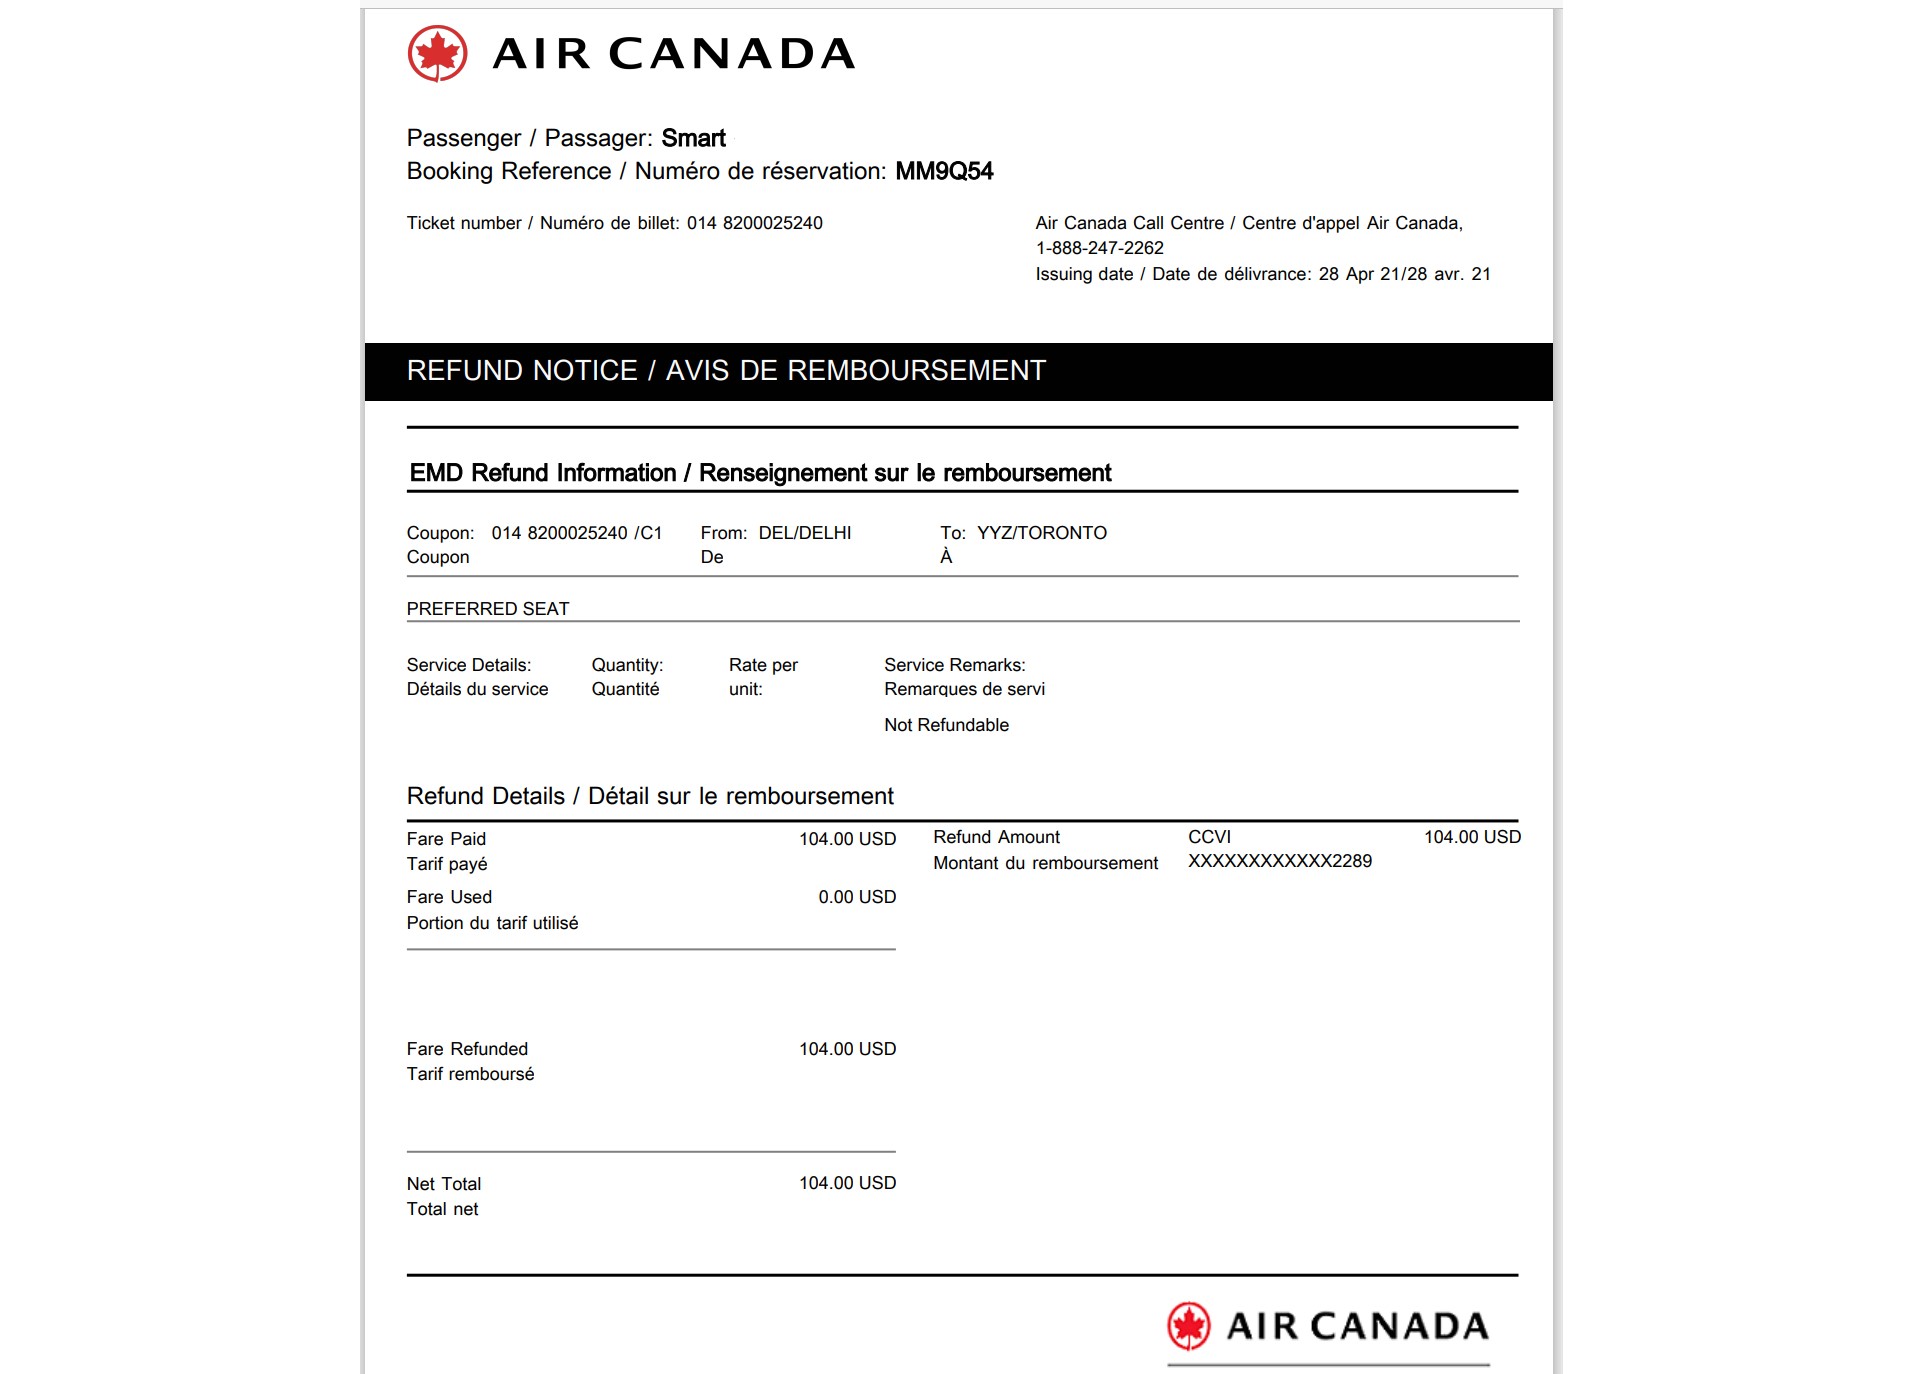 Validating my request for refund by Air Canada on 